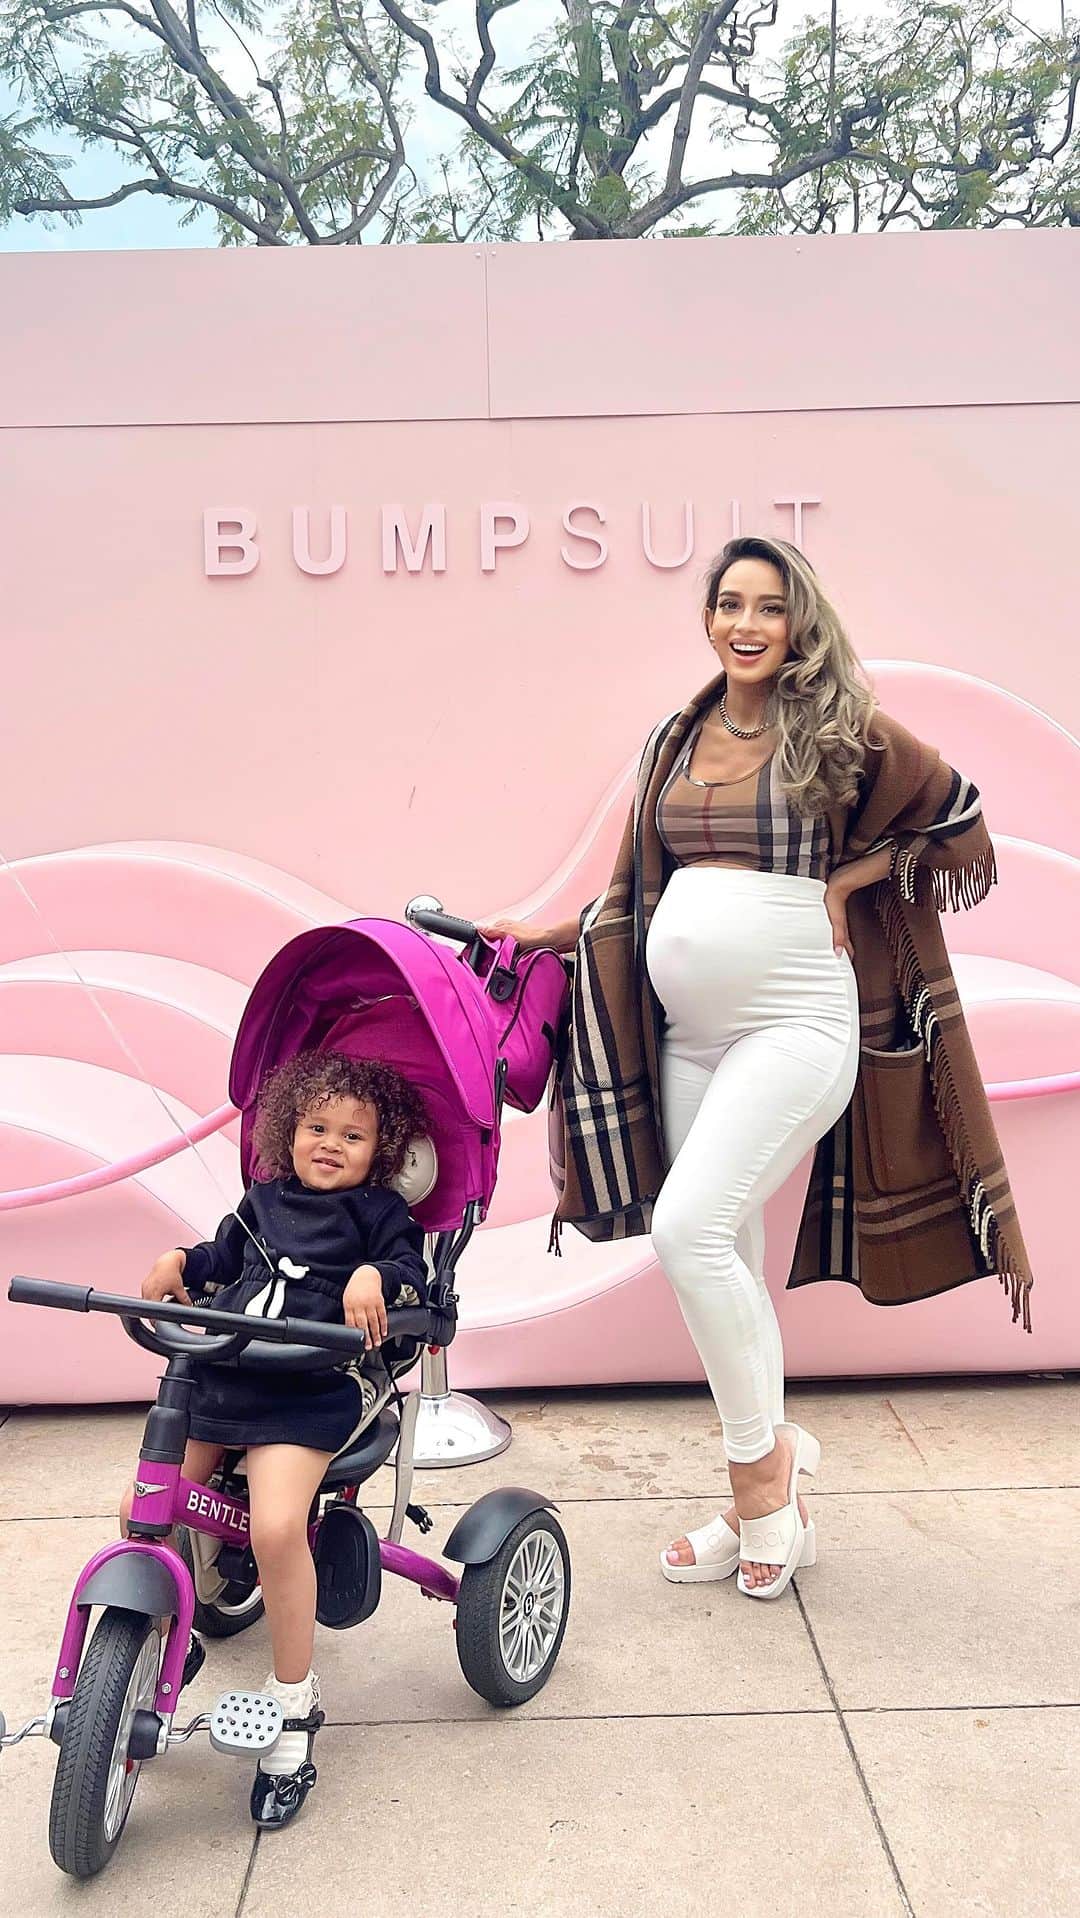 Sarah Mundoのインスタグラム：「The Pink Carpet and community walk celebrating maternity and motherhood. hosted by @bumpsuit @nictrunfio Amazong job!  Great experience meeting other moms going into mothers day weekend and connecting with like minded women like @flyginapie with yoga, @nazaninmandi, and other beauties in their journies.  Wearing “The Lucy” size M at 32 wks pregnant  and “The Legging” size M Link in bio “SarahM” for 20% discount  #maternity #bumpsuit #theGrove #LA #mother #yoga」